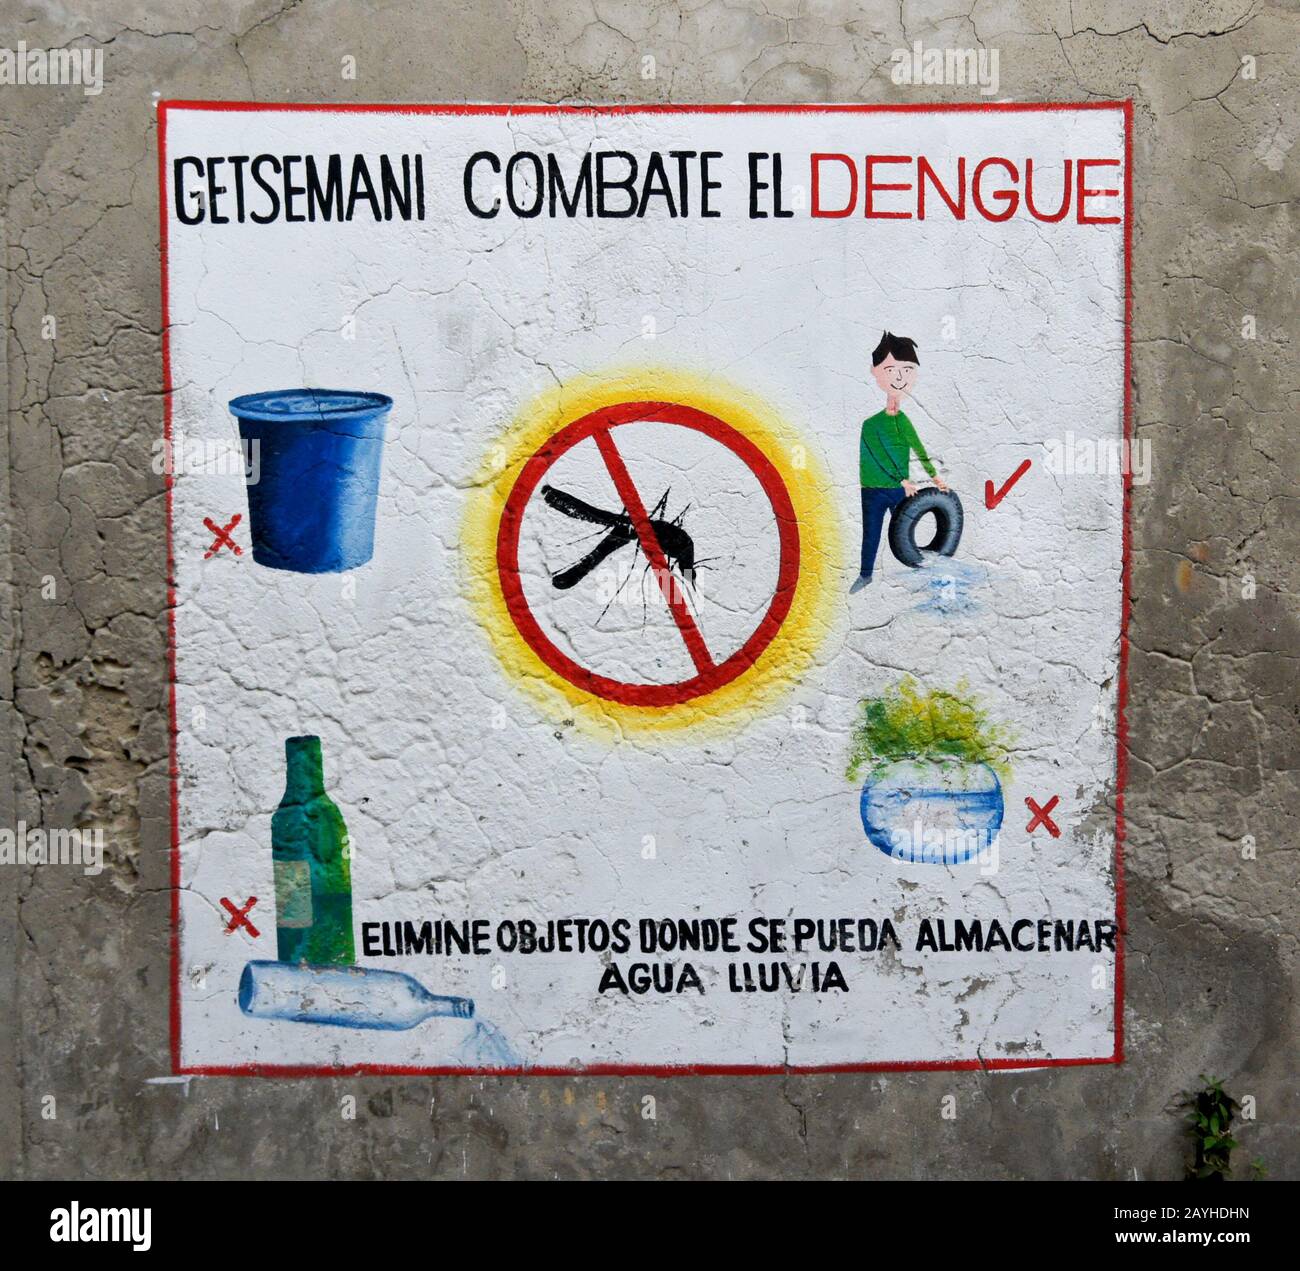 Information (in Spanish) painted on an exterior wall encourages eliminating objects which hold standing water and attract mosquitoes that cause dengue Stock Photo